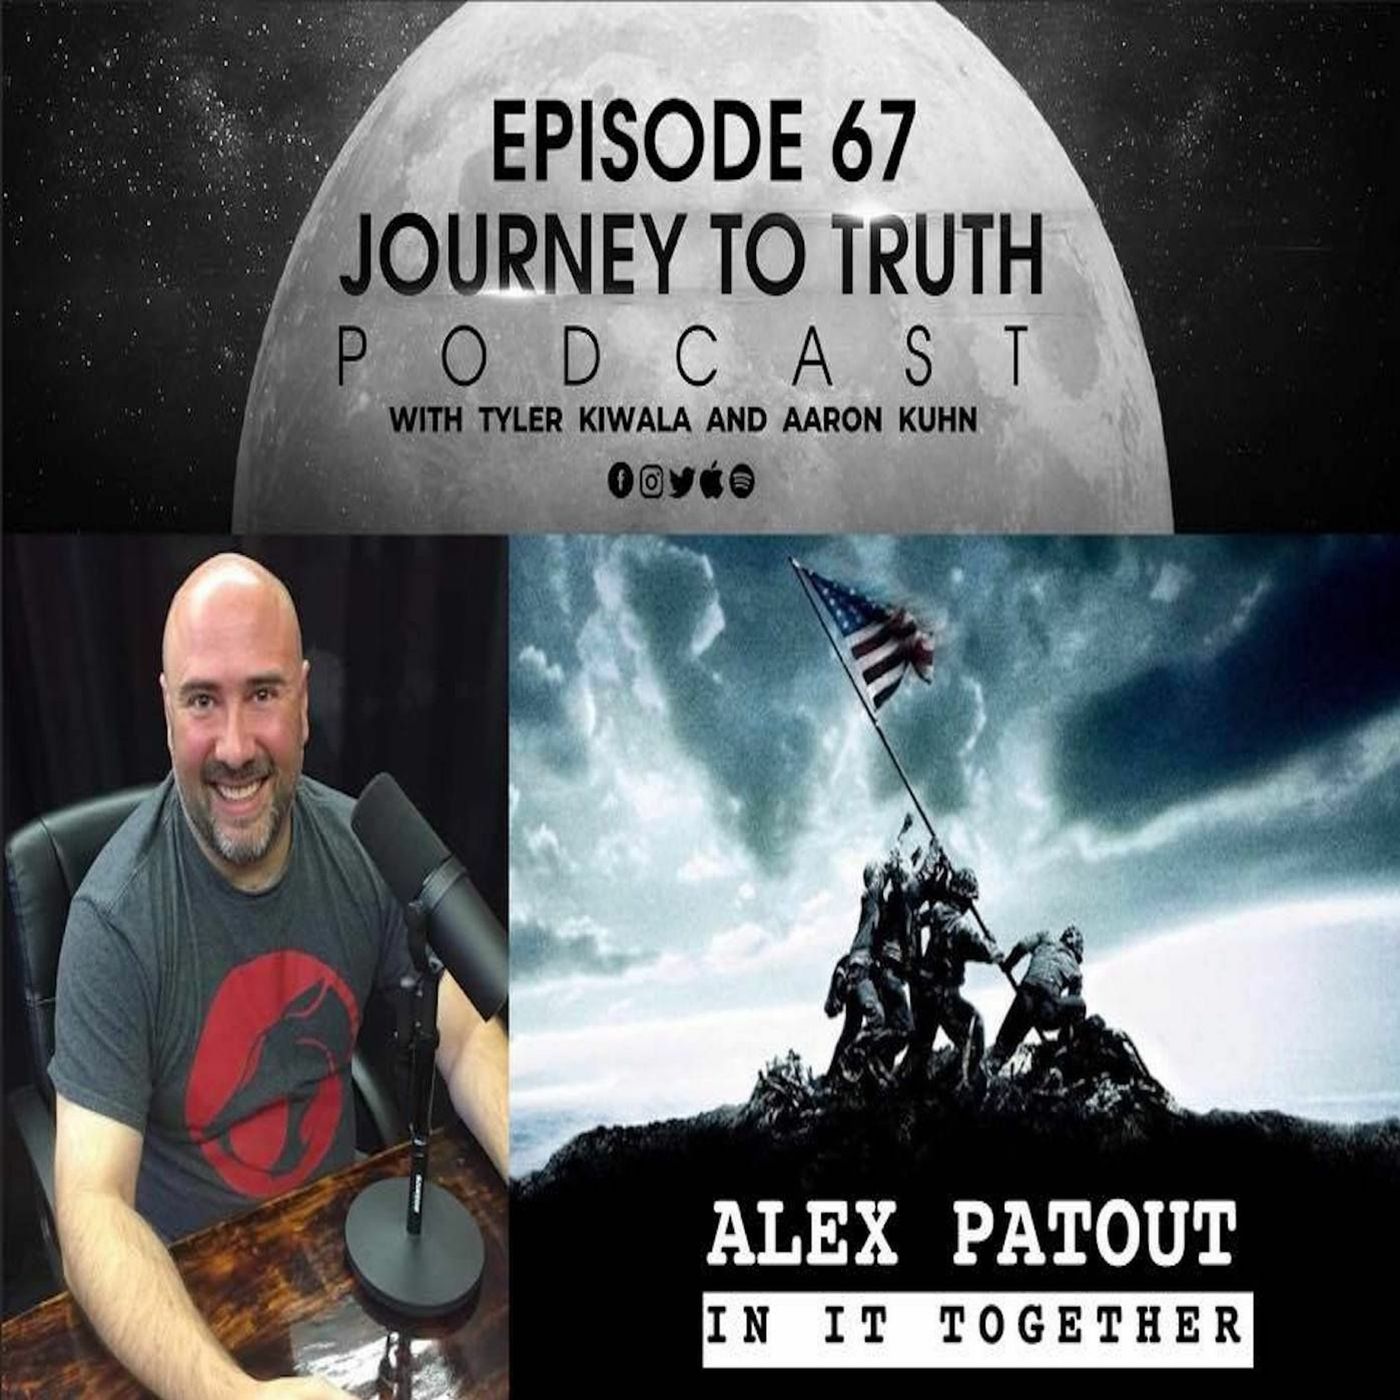 EP 67 - Alex Patout - Classified Technology - Q+POTUS Connection - Self Discovery